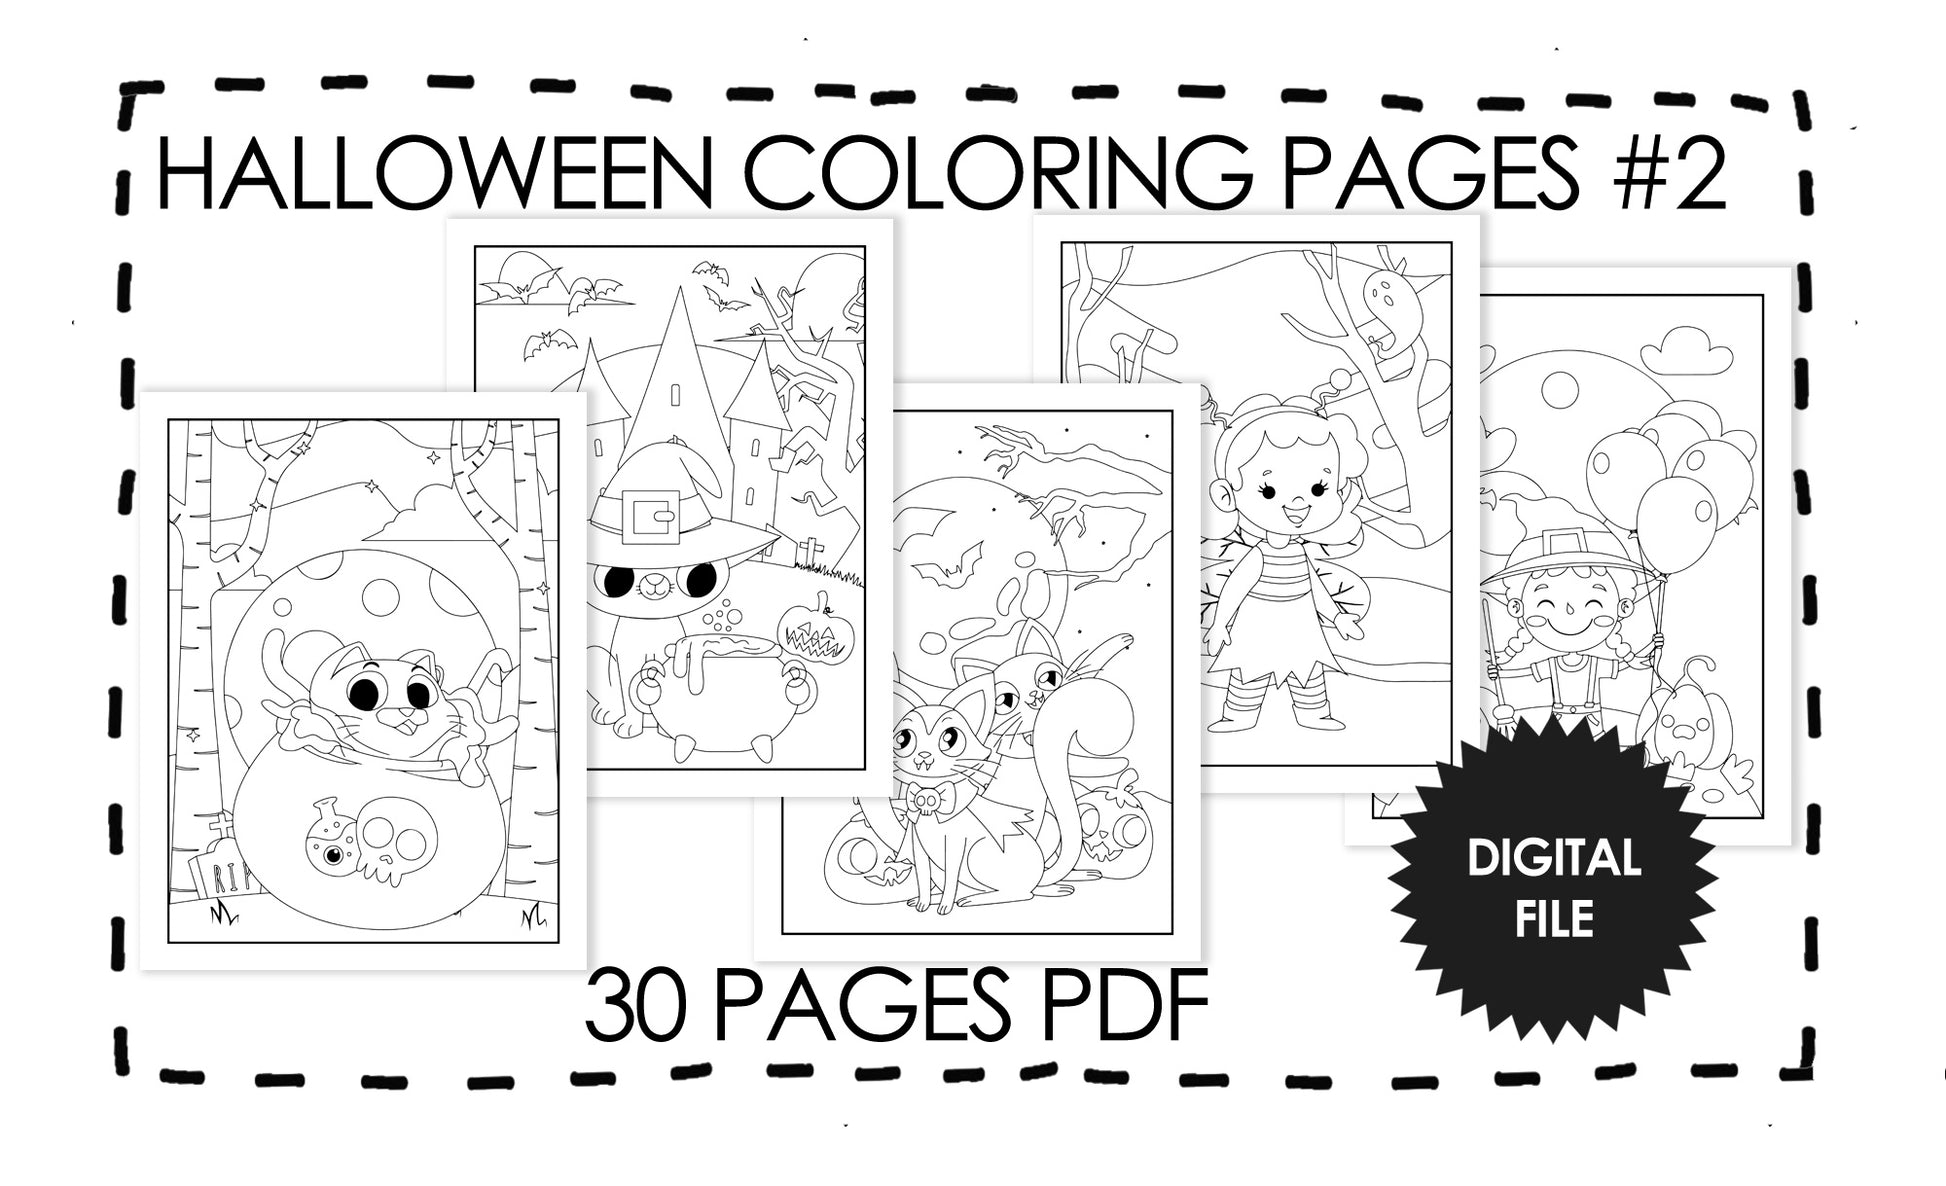 Halloween Activity Book for Kids Ages 4-8: Coloring, Drawing